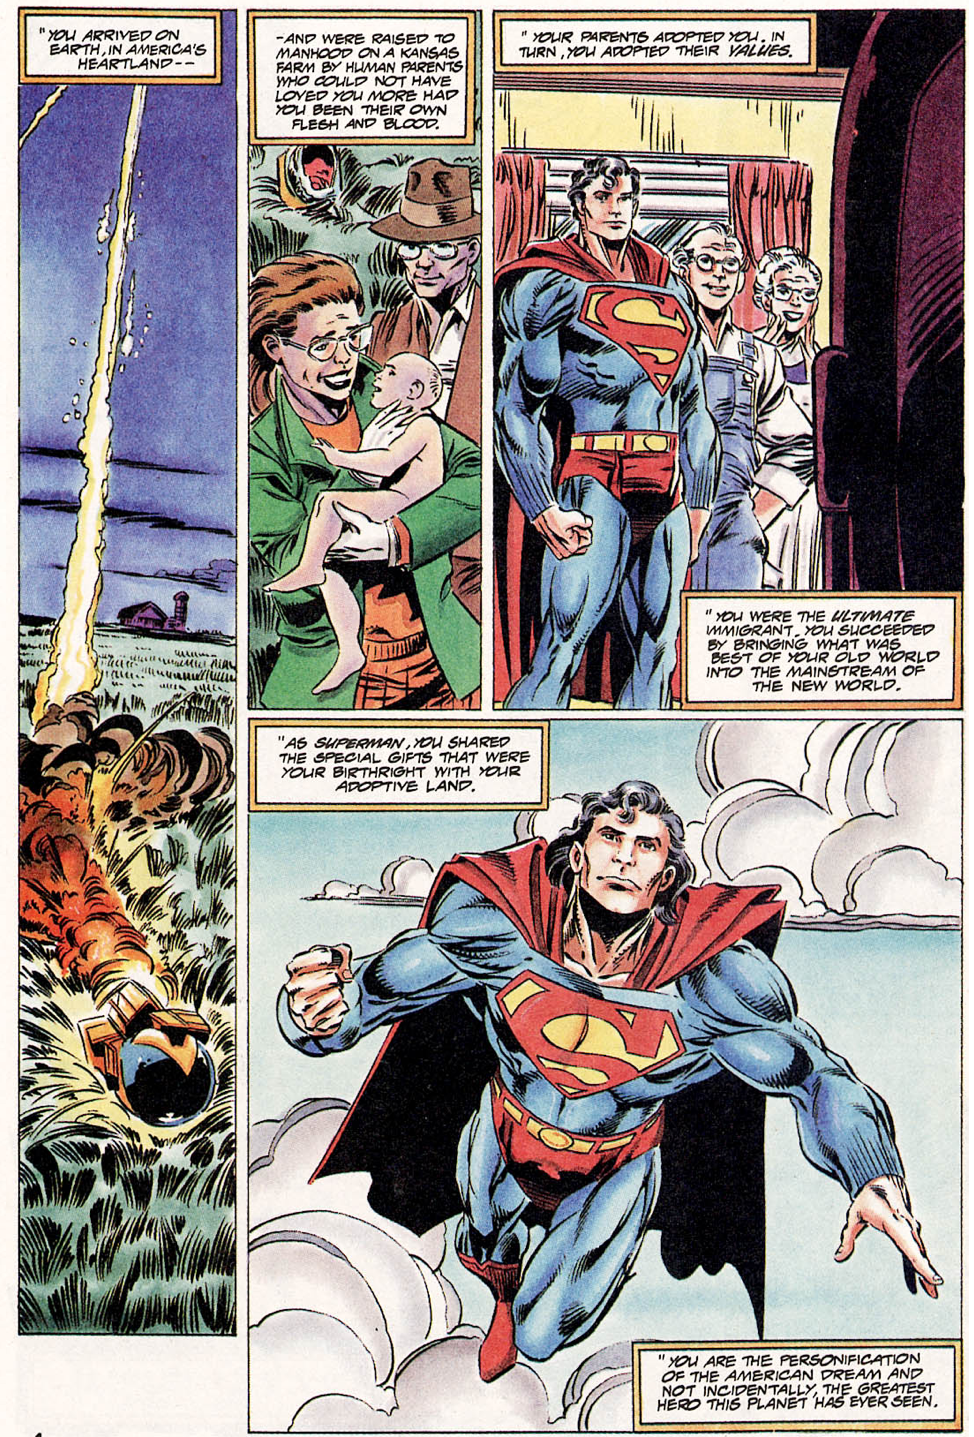 The Superman Crossover That Perfectly Explained White Privilege Decades Ago